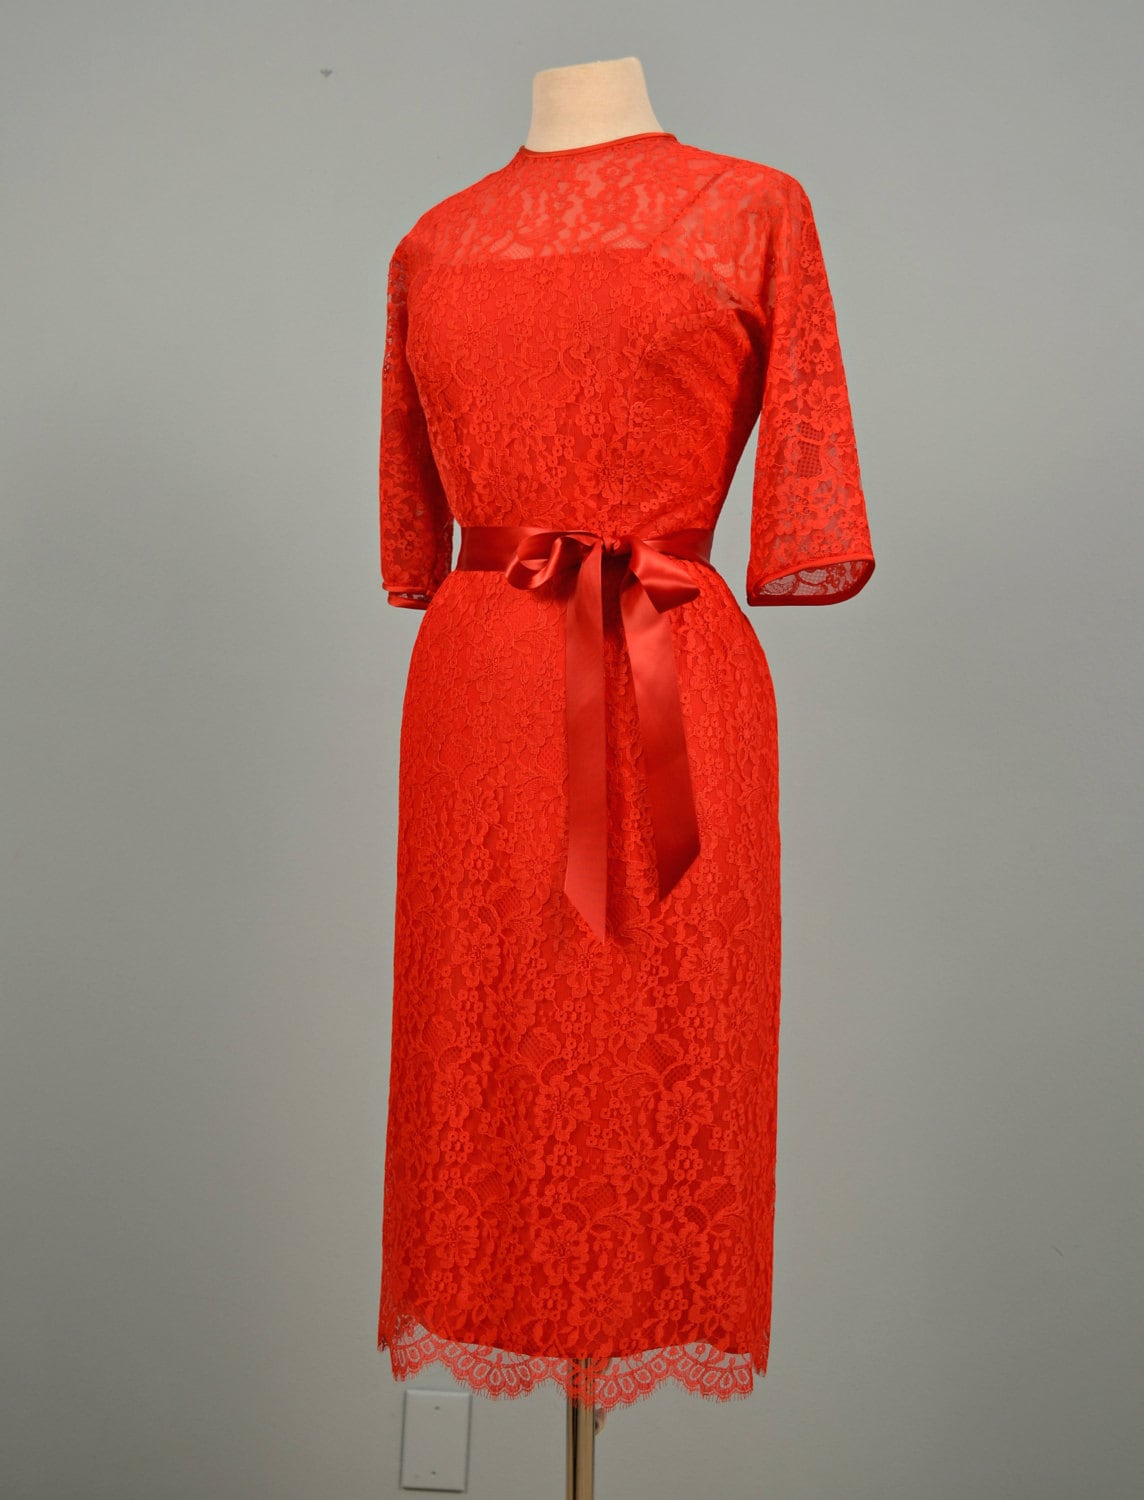 1960s Party Dress...DAUPHINE Red Lace Party Dress by deomas